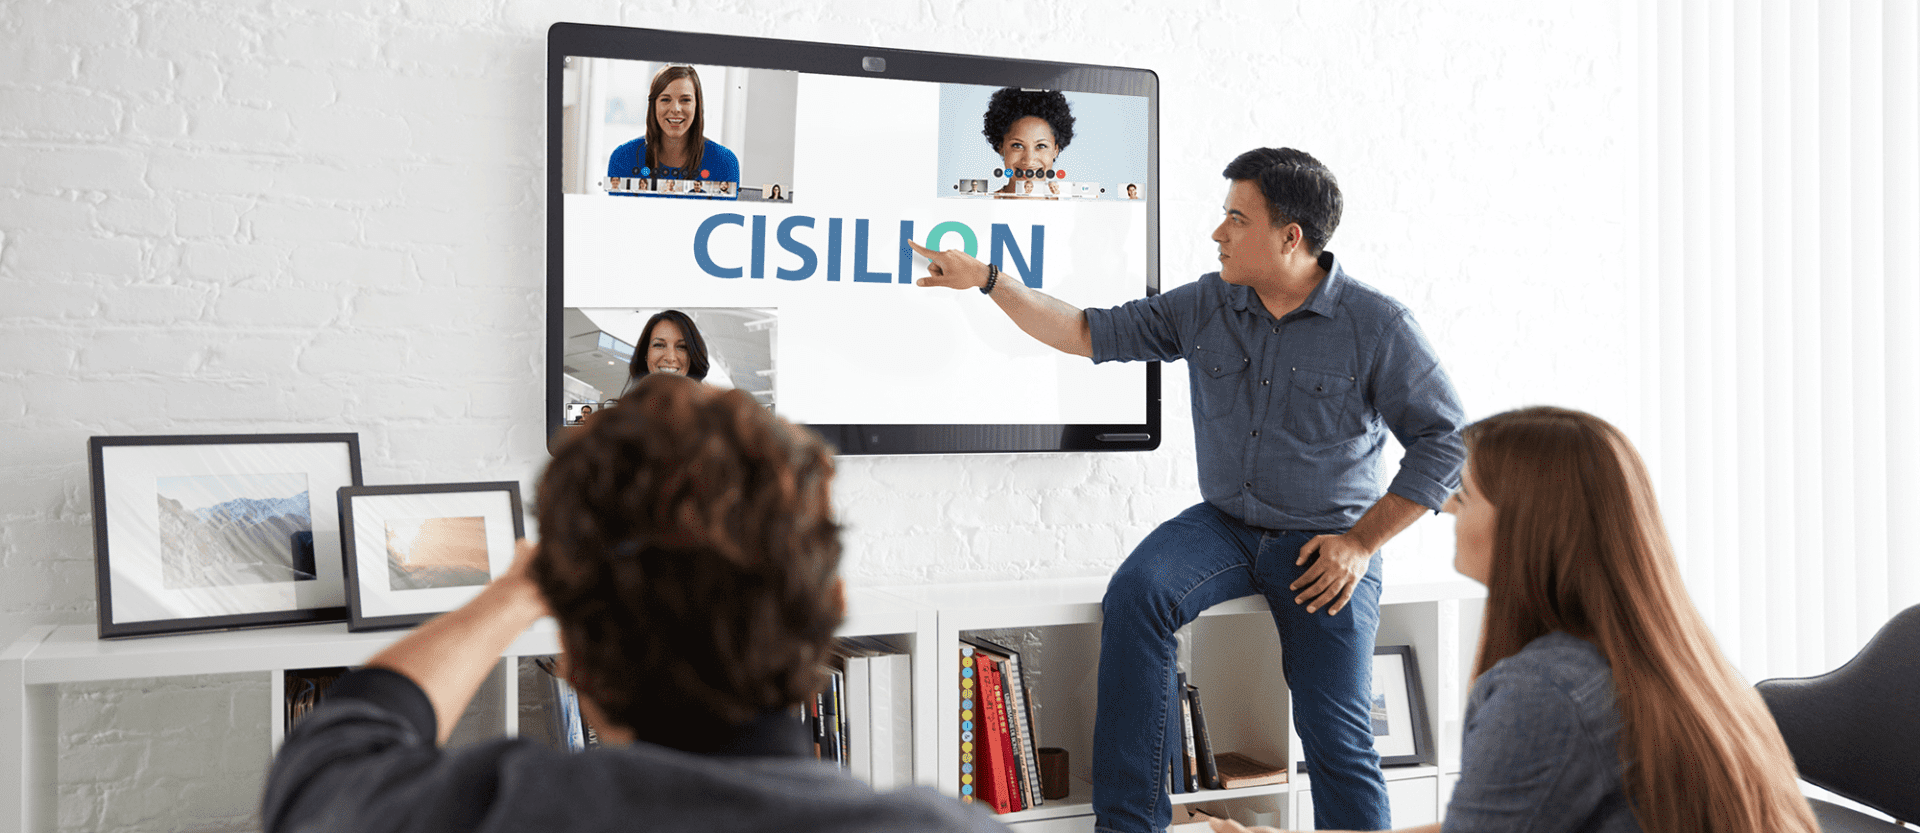 Cisilion Enterprise Agreement – What You Need to Know